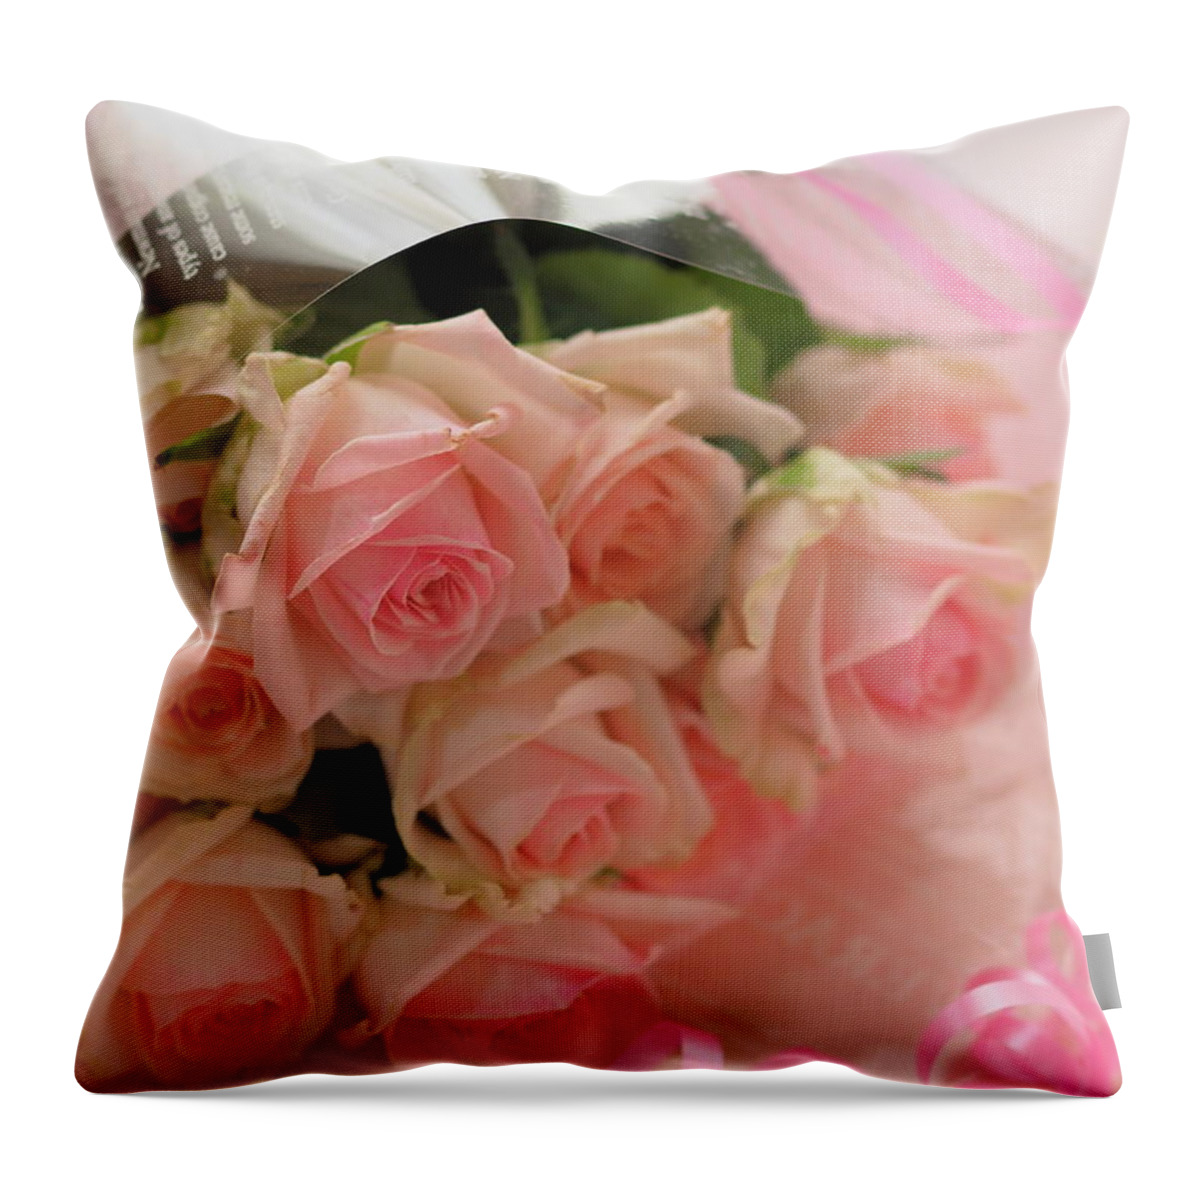 Bouquet Throw Pillow featuring the photograph Sweet Gift by Yuka Kato